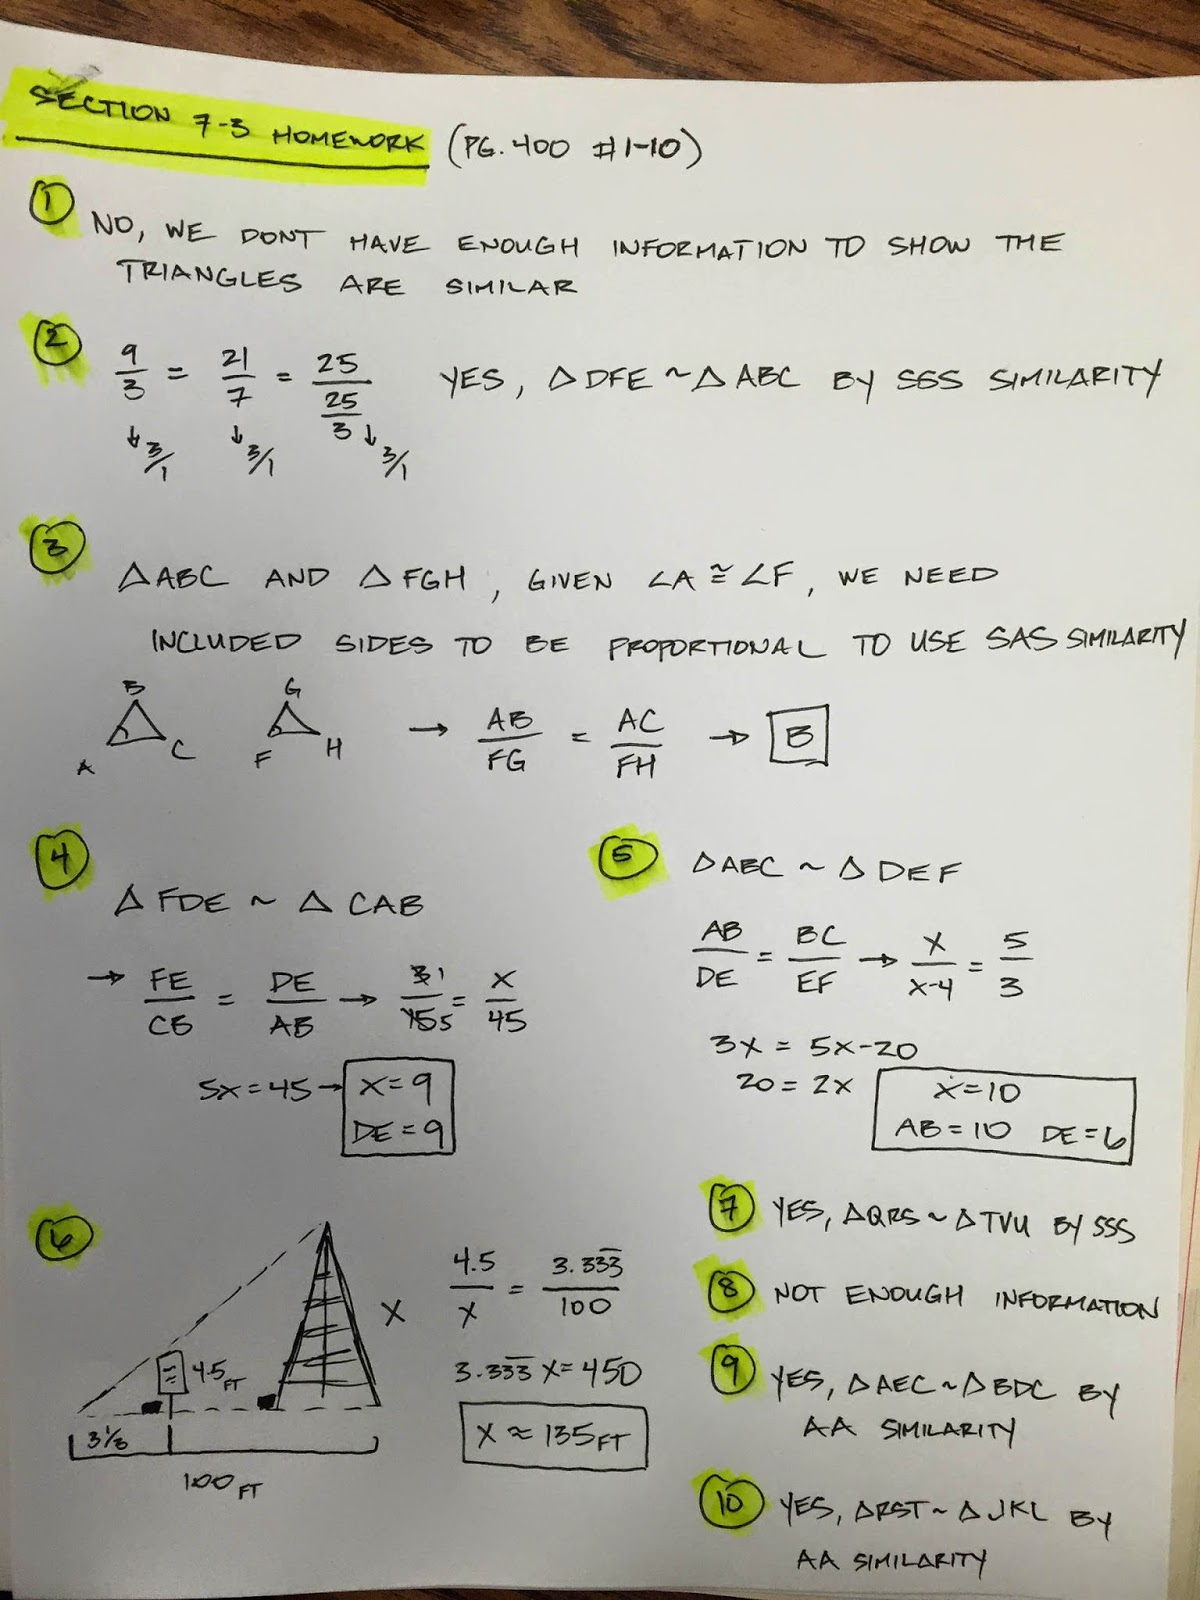 Honors Geometry - Vintage High School: Section 7-3 Similar Triangles